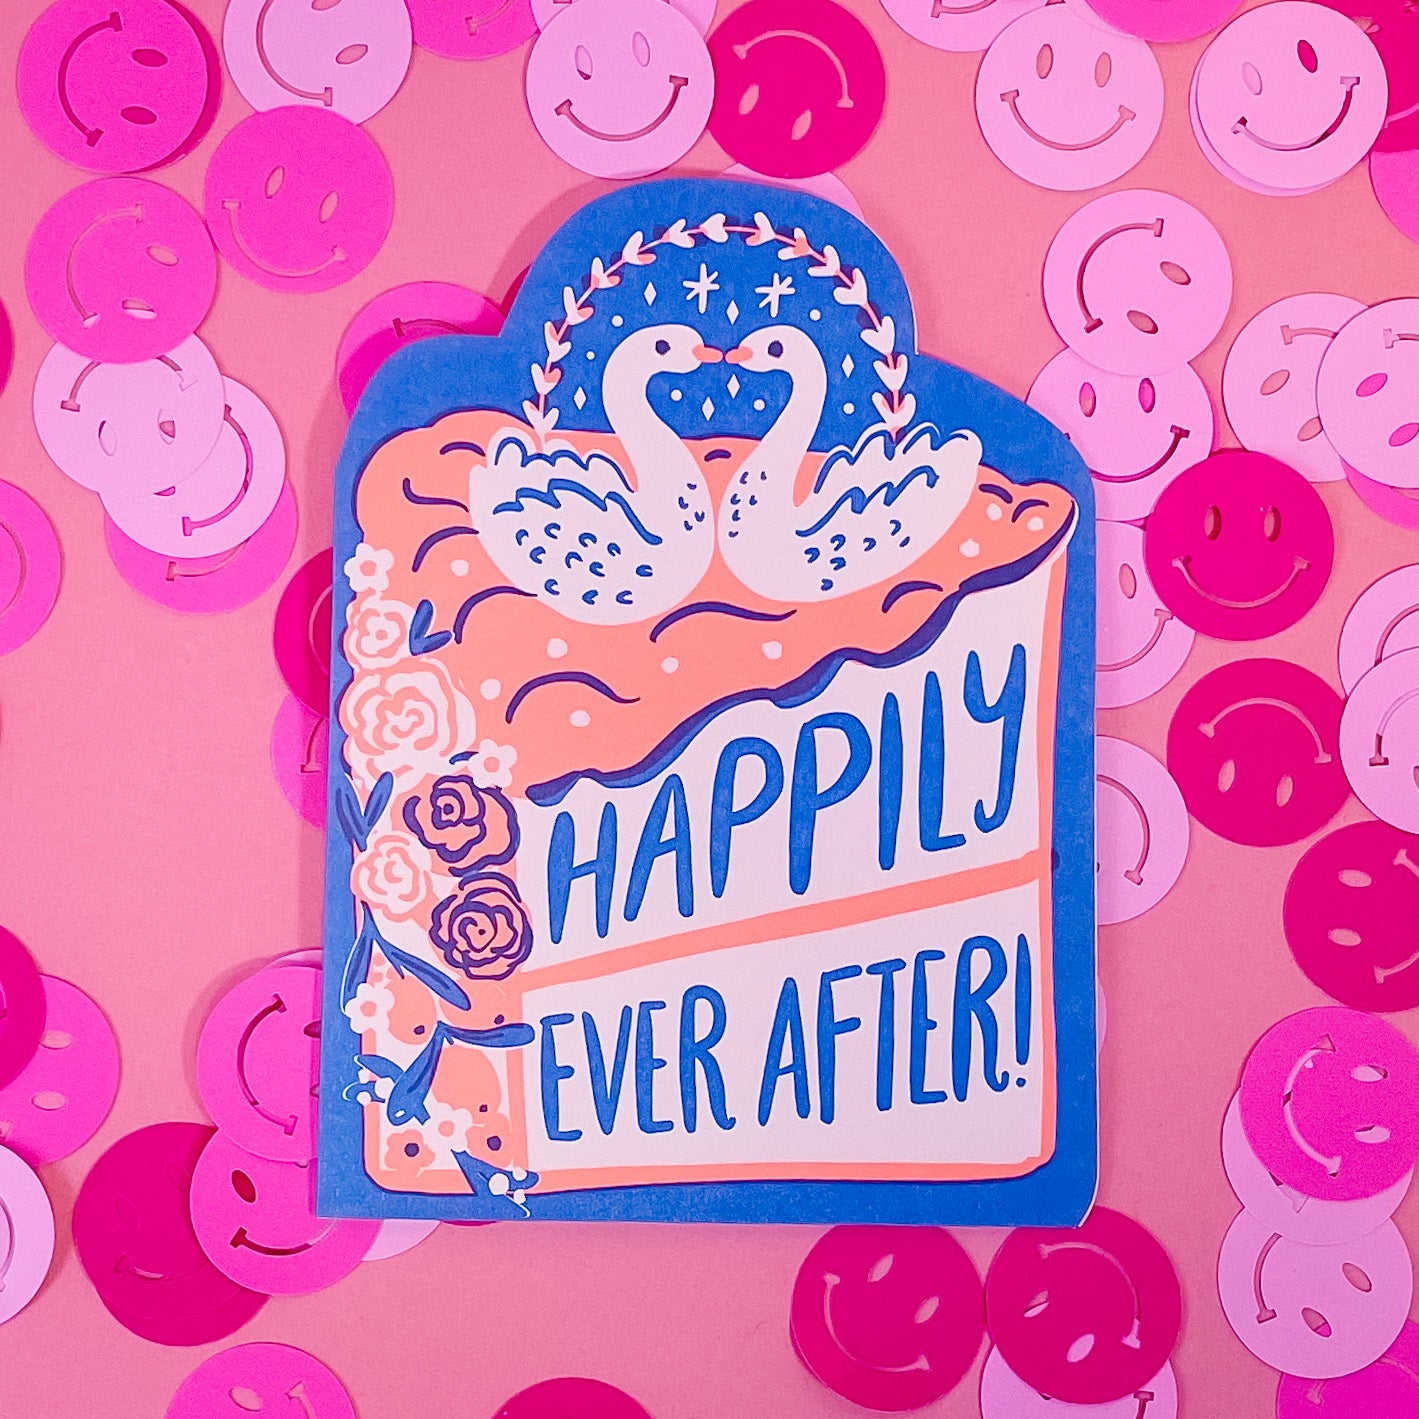 Happily Ever After Wedding Cake Card - Gasp